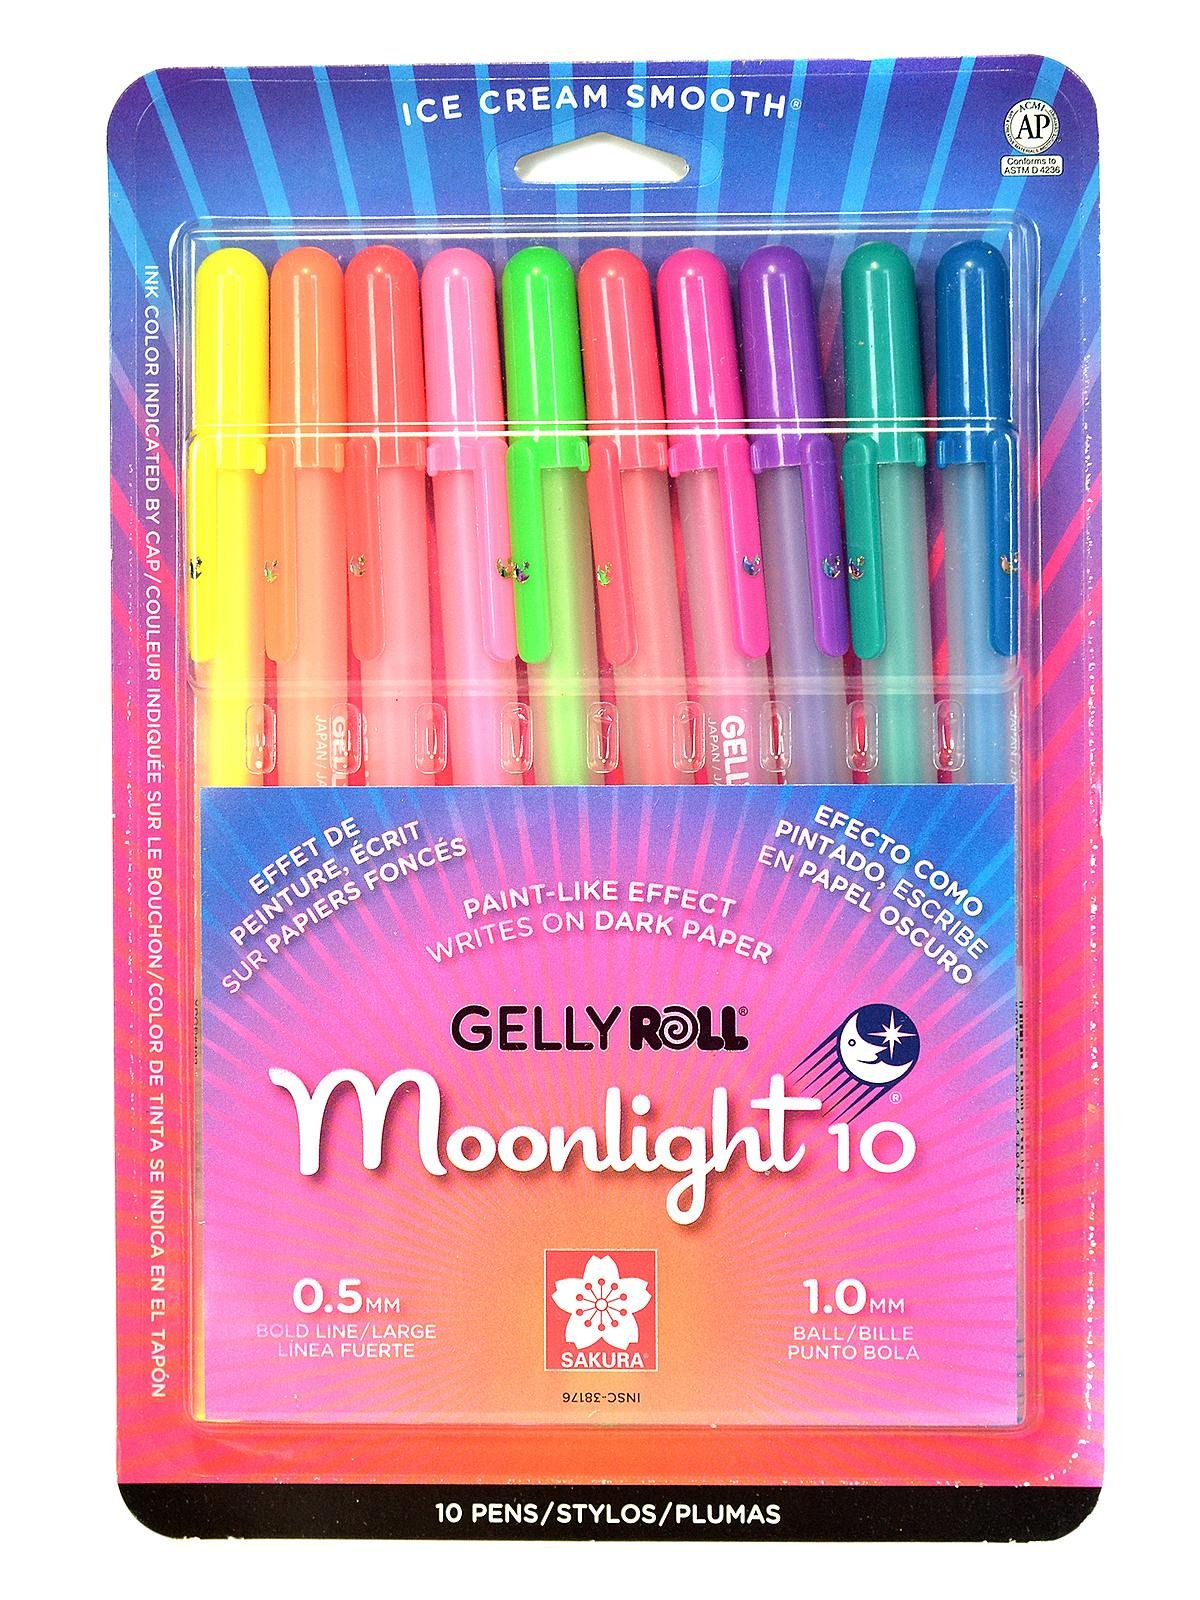 Jelly Roll Roller Moonlight Gel Pens - Colored Ink Colors - 10